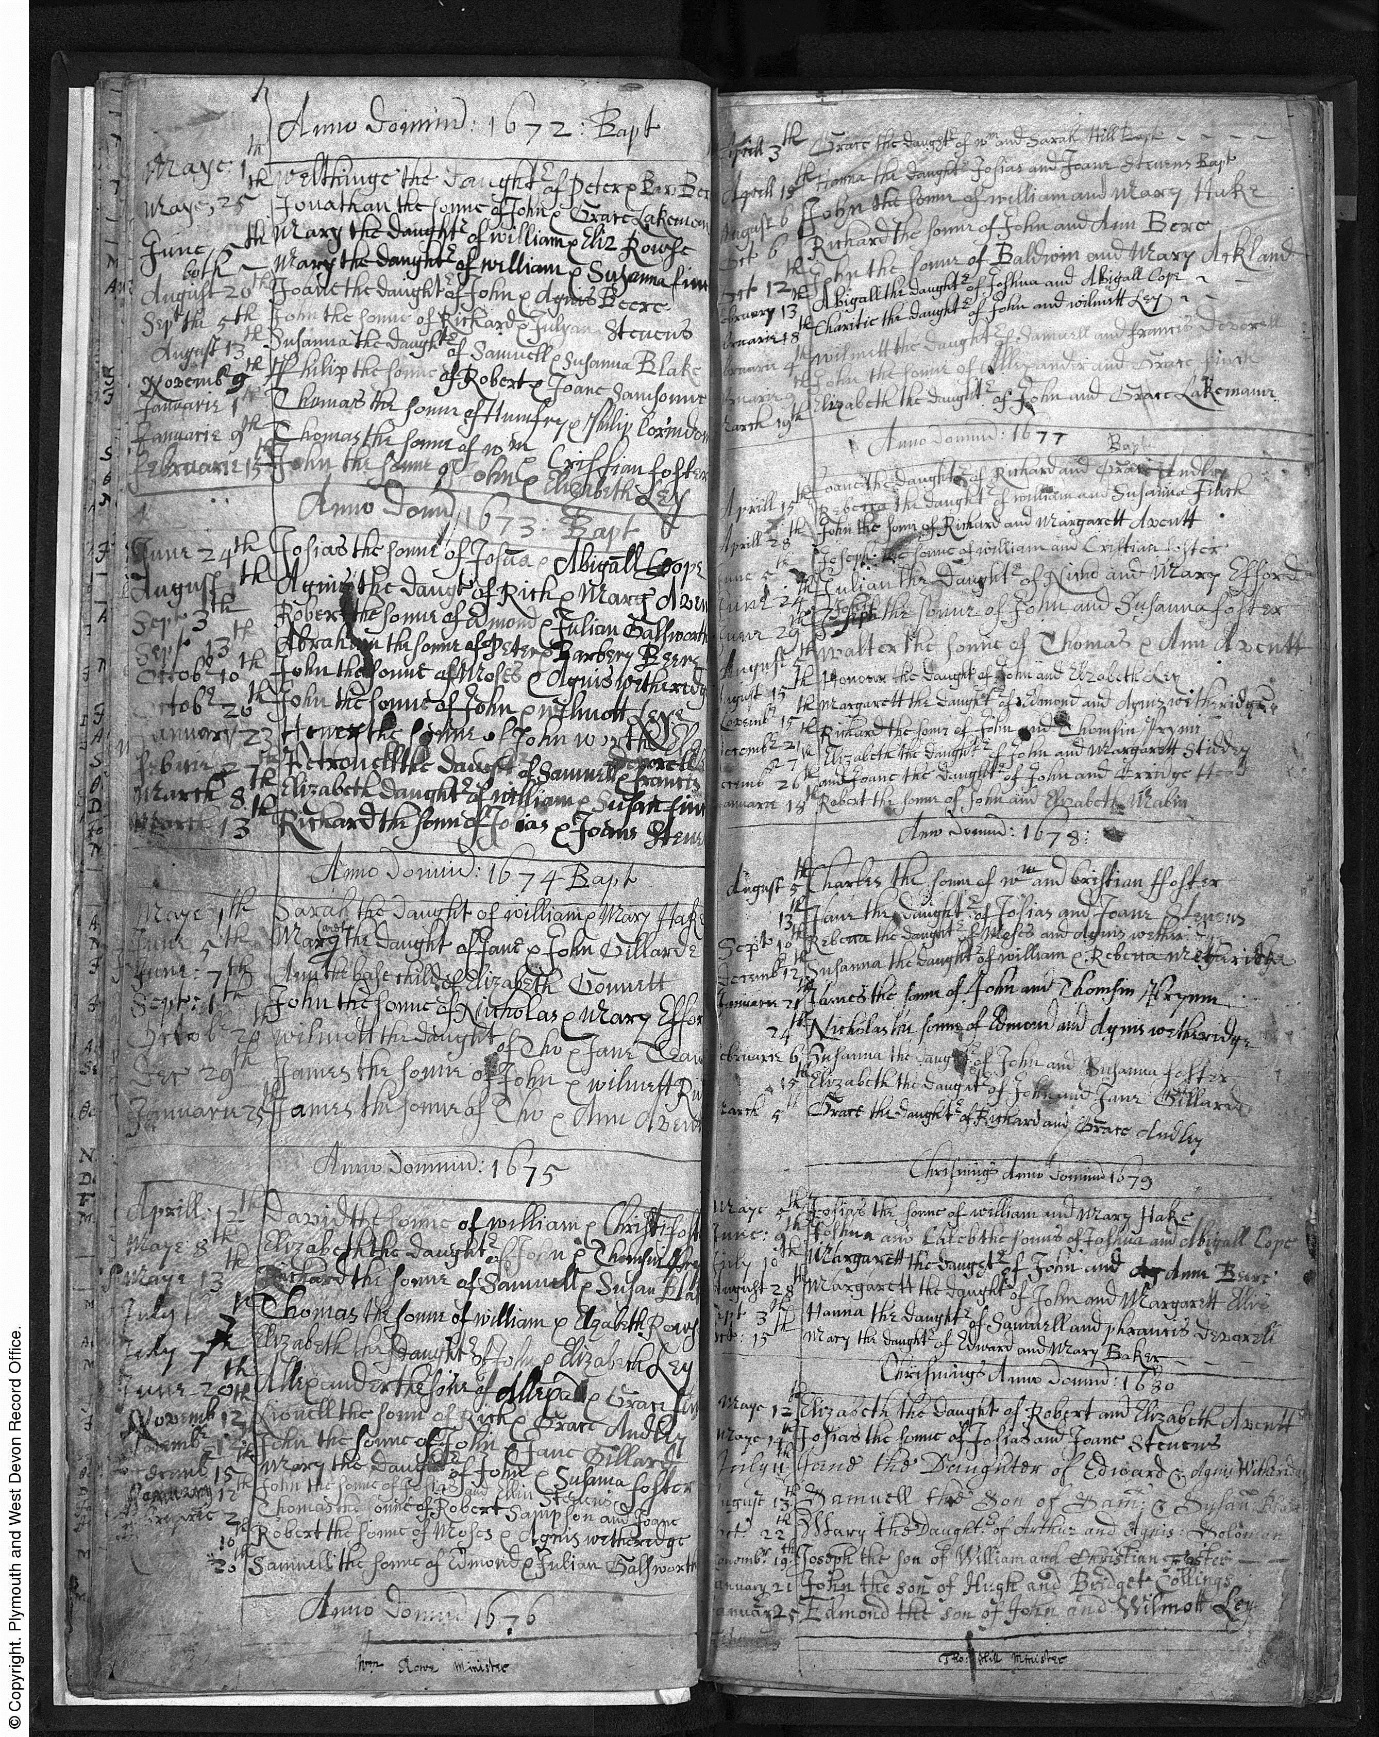 C:\Users\Virginia Rundle\Documents\Ancestry\Northey Moar Files\Hake\Baptism of John Hake son of William and Mary Hake 6 Aug 1676 B1 also siblings Josiah 1679 and Sarah 1674.jpg